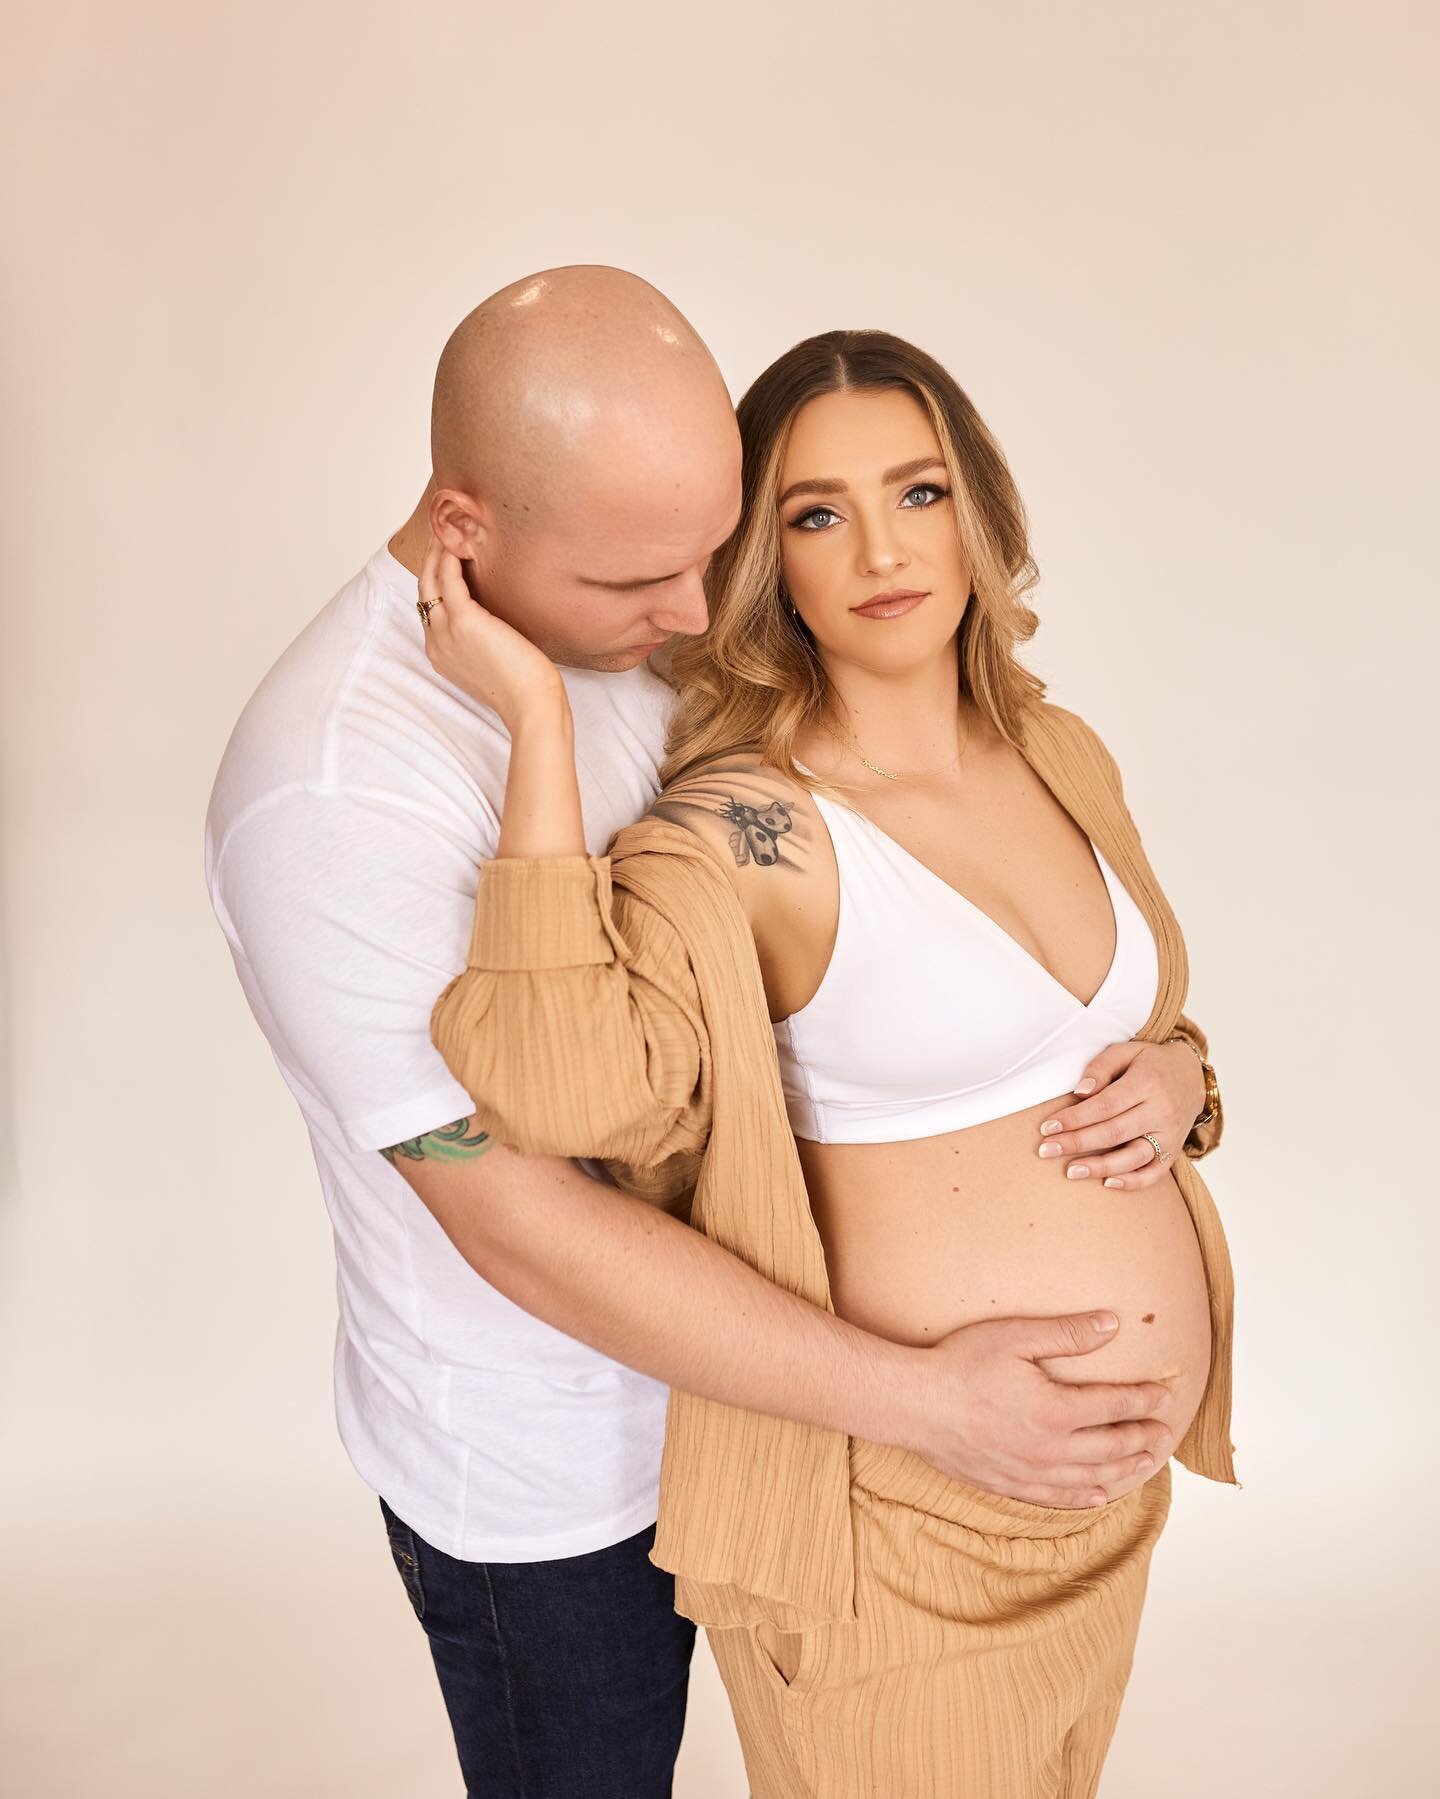 &ldquo;why should I book a maternity session?&rdquo; 

A maternity session marks the important + life-altering transition into motherhood. It&rsquo;s an incredible way to embrace your new identity as a momma and celebrate this new phase of life with 